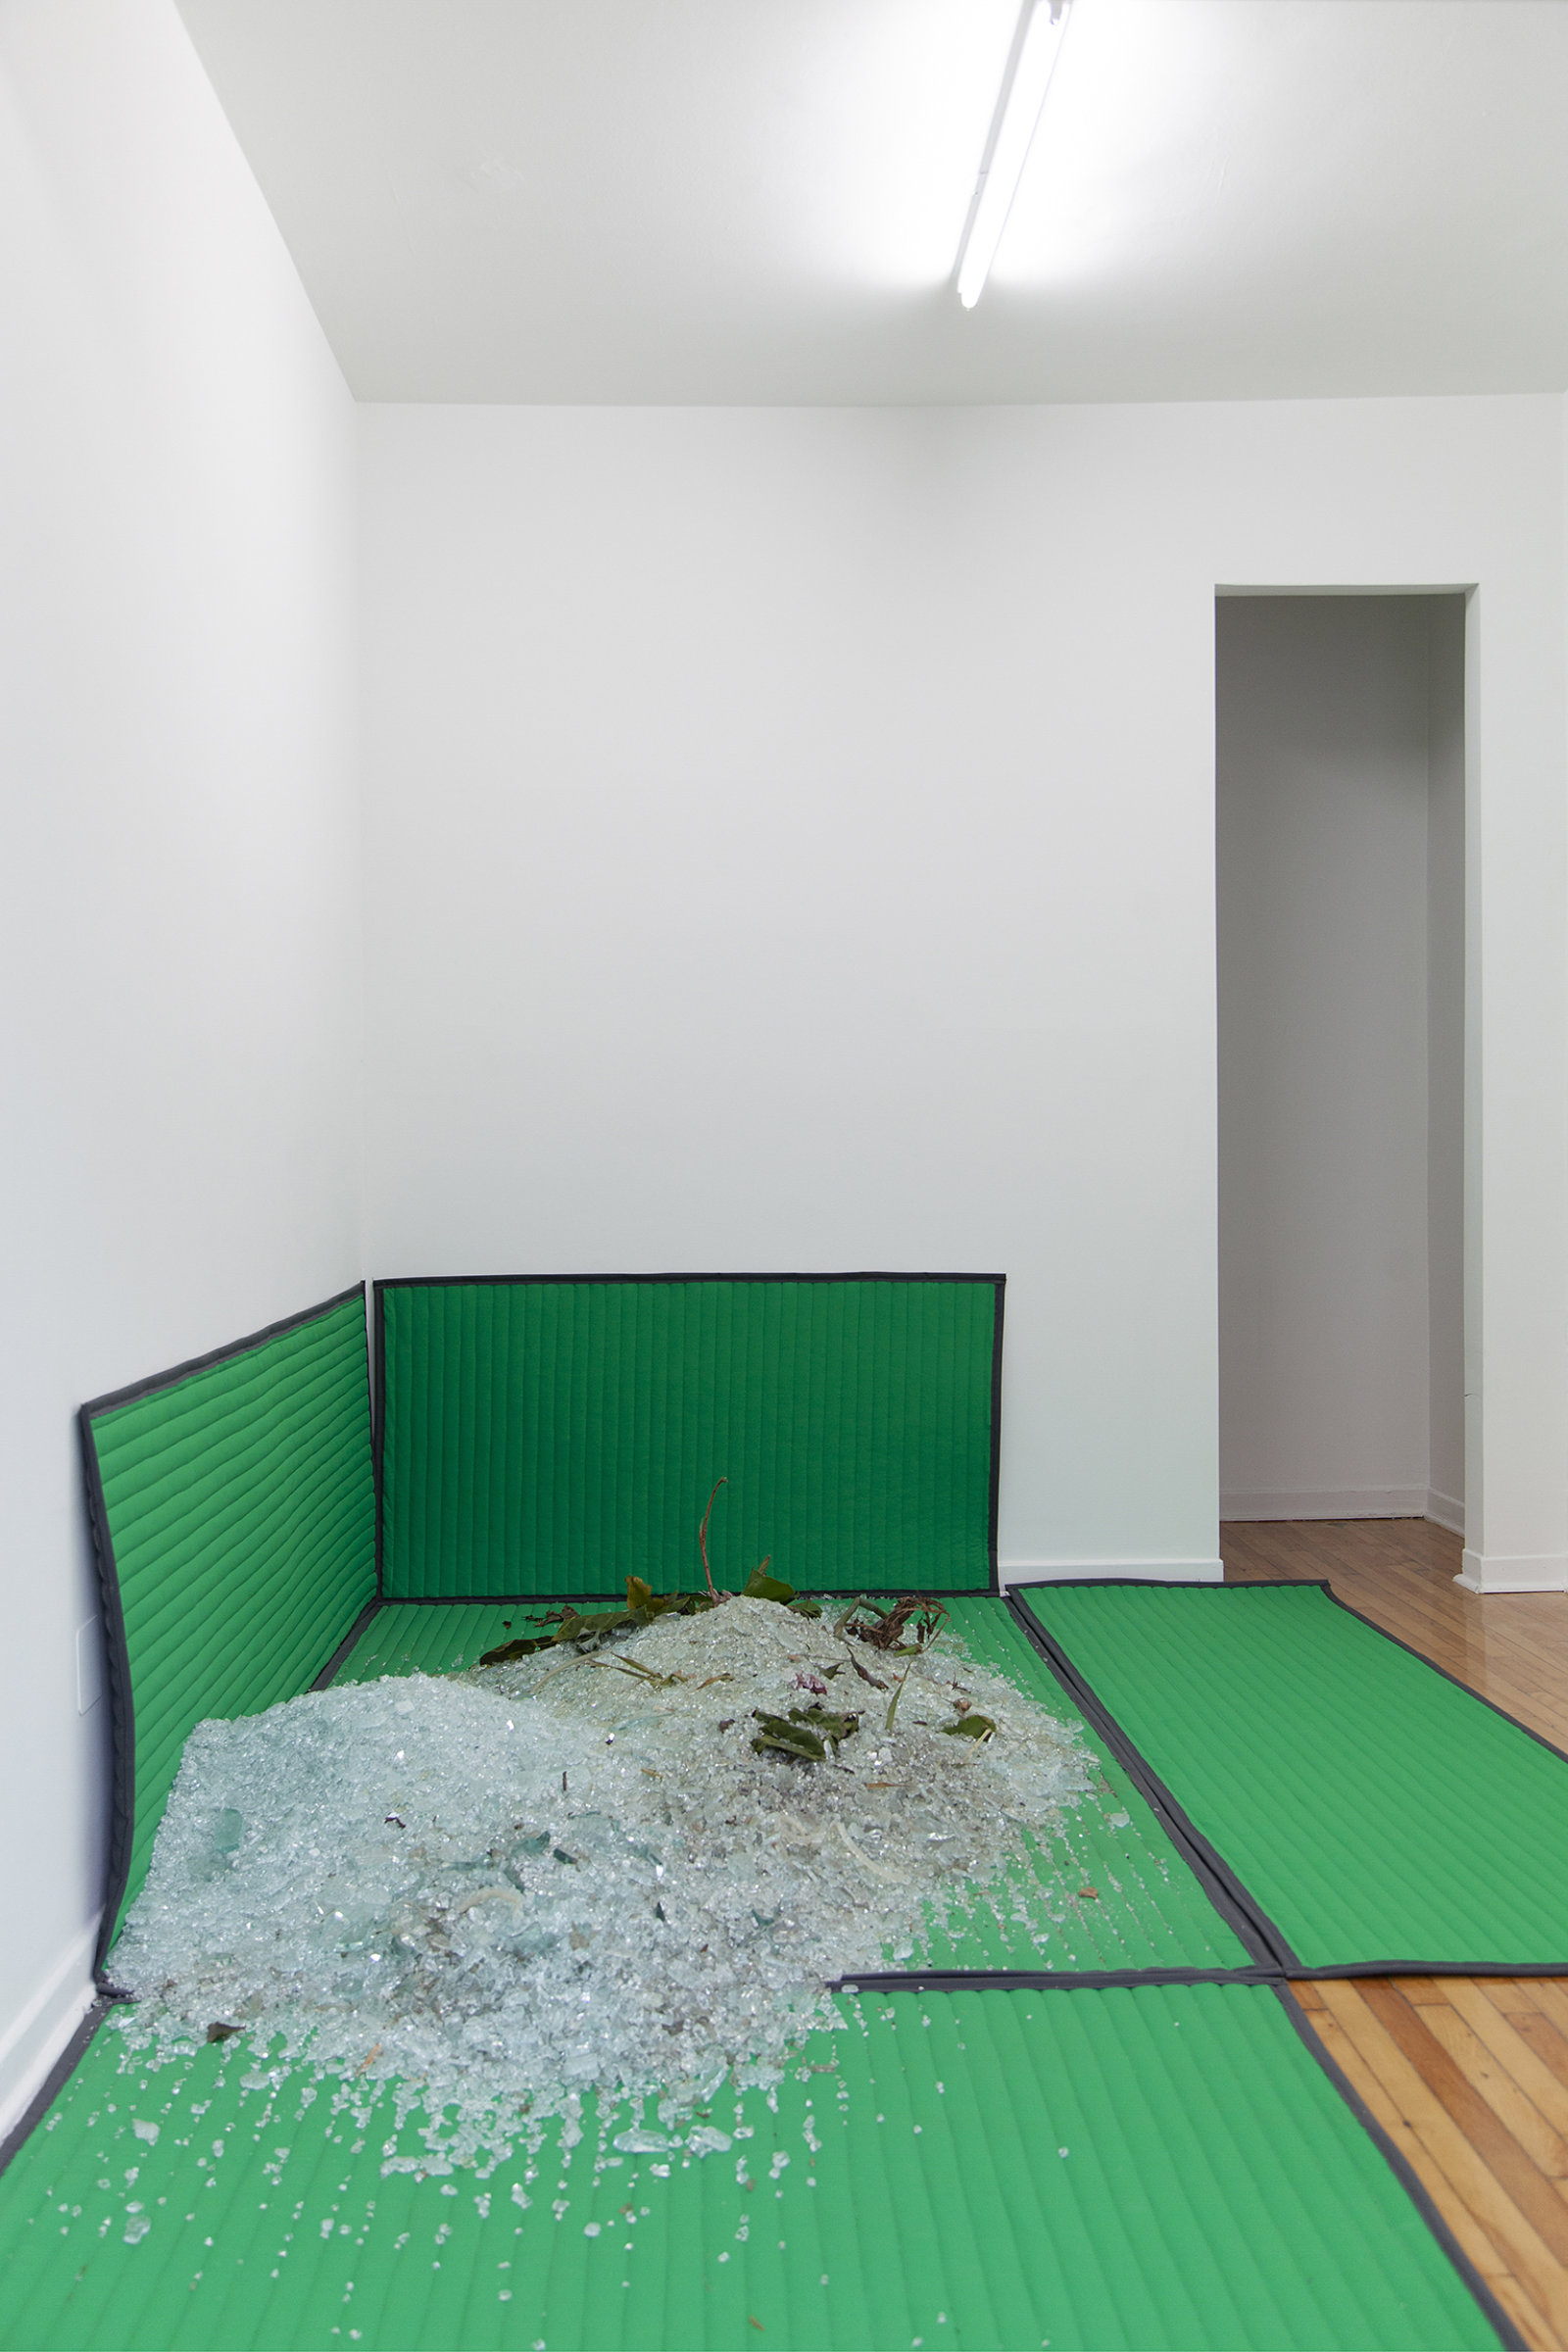 Abbas Akhavan, untitled, 2020, heavy-duty vinyl-reinforced polyester, quilt batting, tropical plants, glass, installation dimensions variable. Installation view, Protocinema at Parc Offsite, Montreal, Canada, 2020